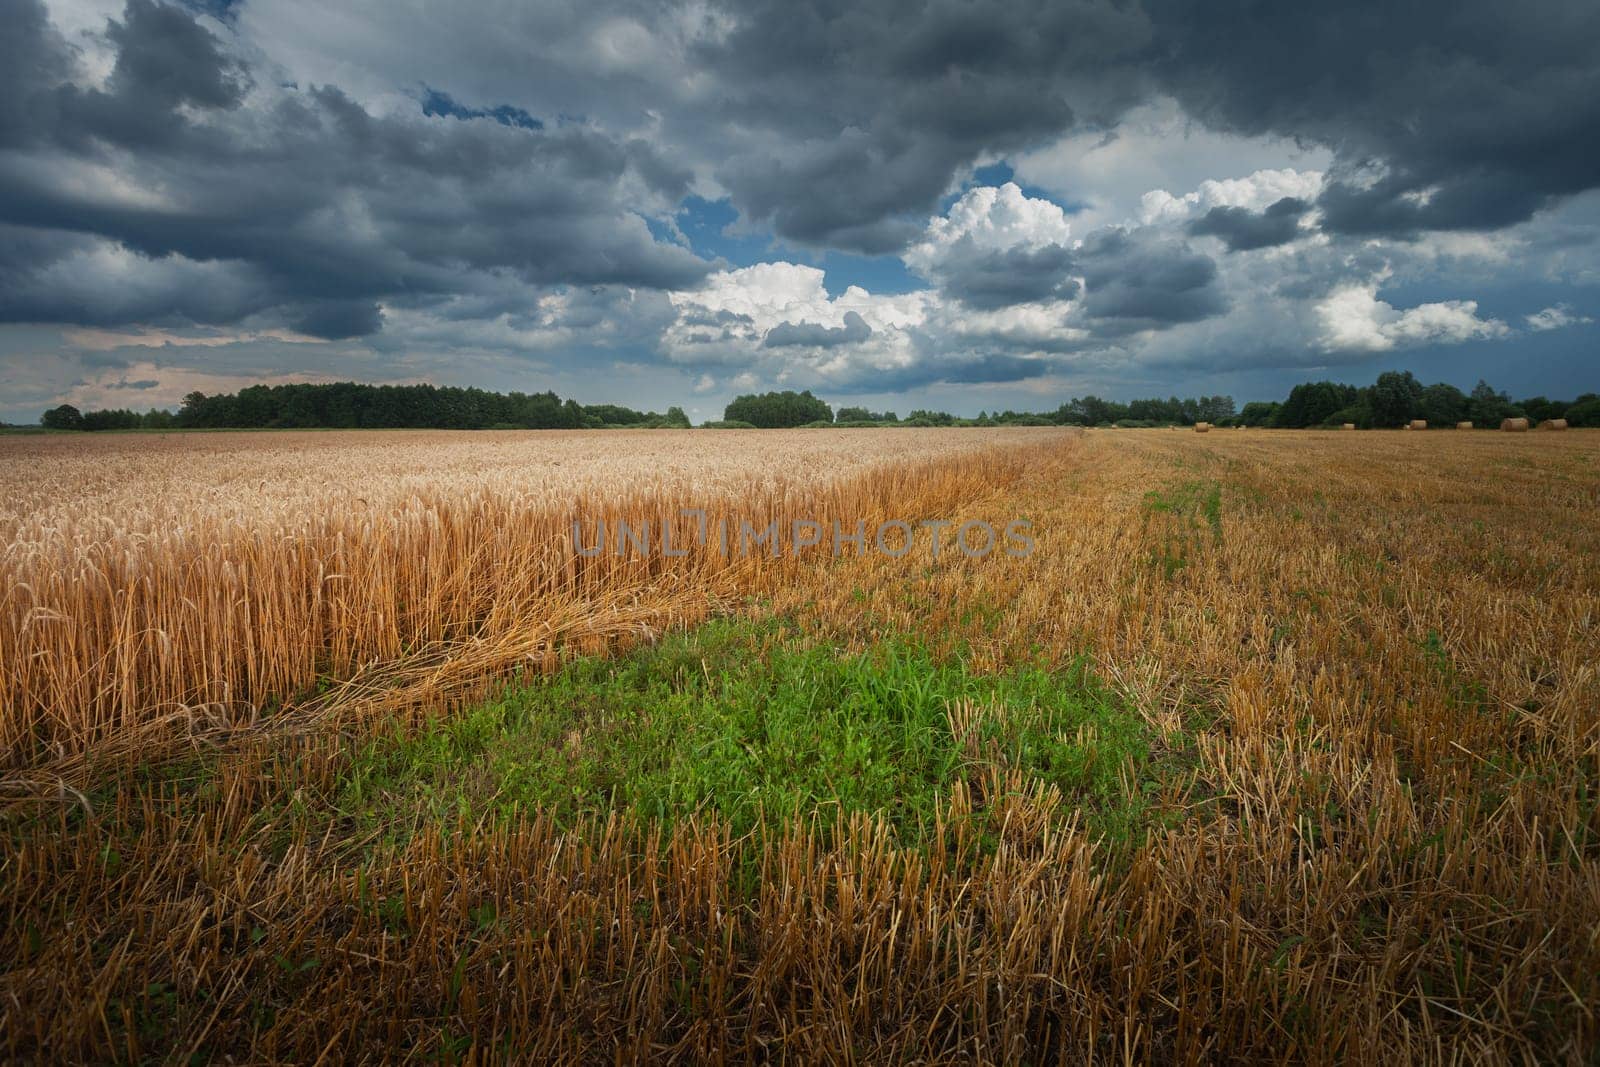 A field with grain and a cloudy sky, a view on a July day, eastern Poland